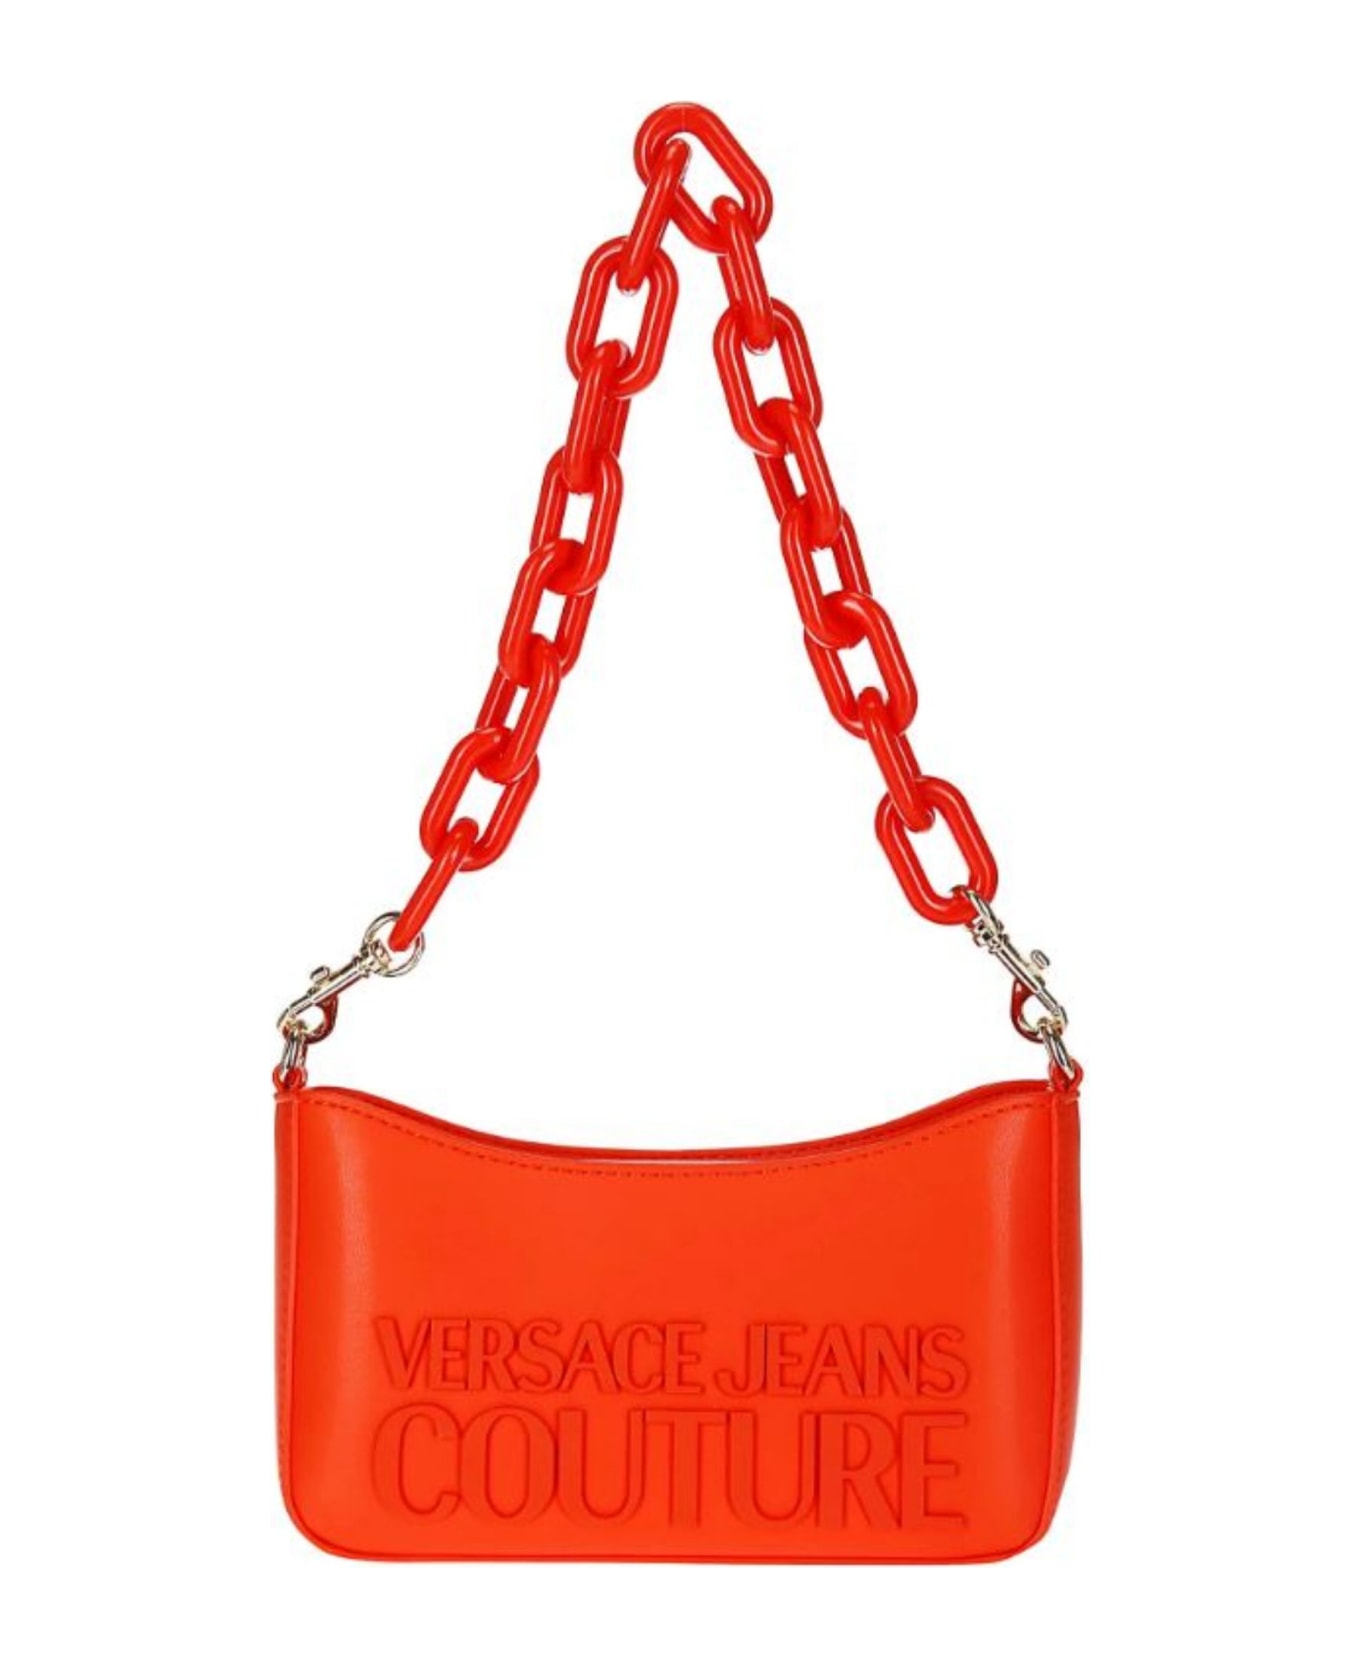 Versace Jeans Couture Bag - 510